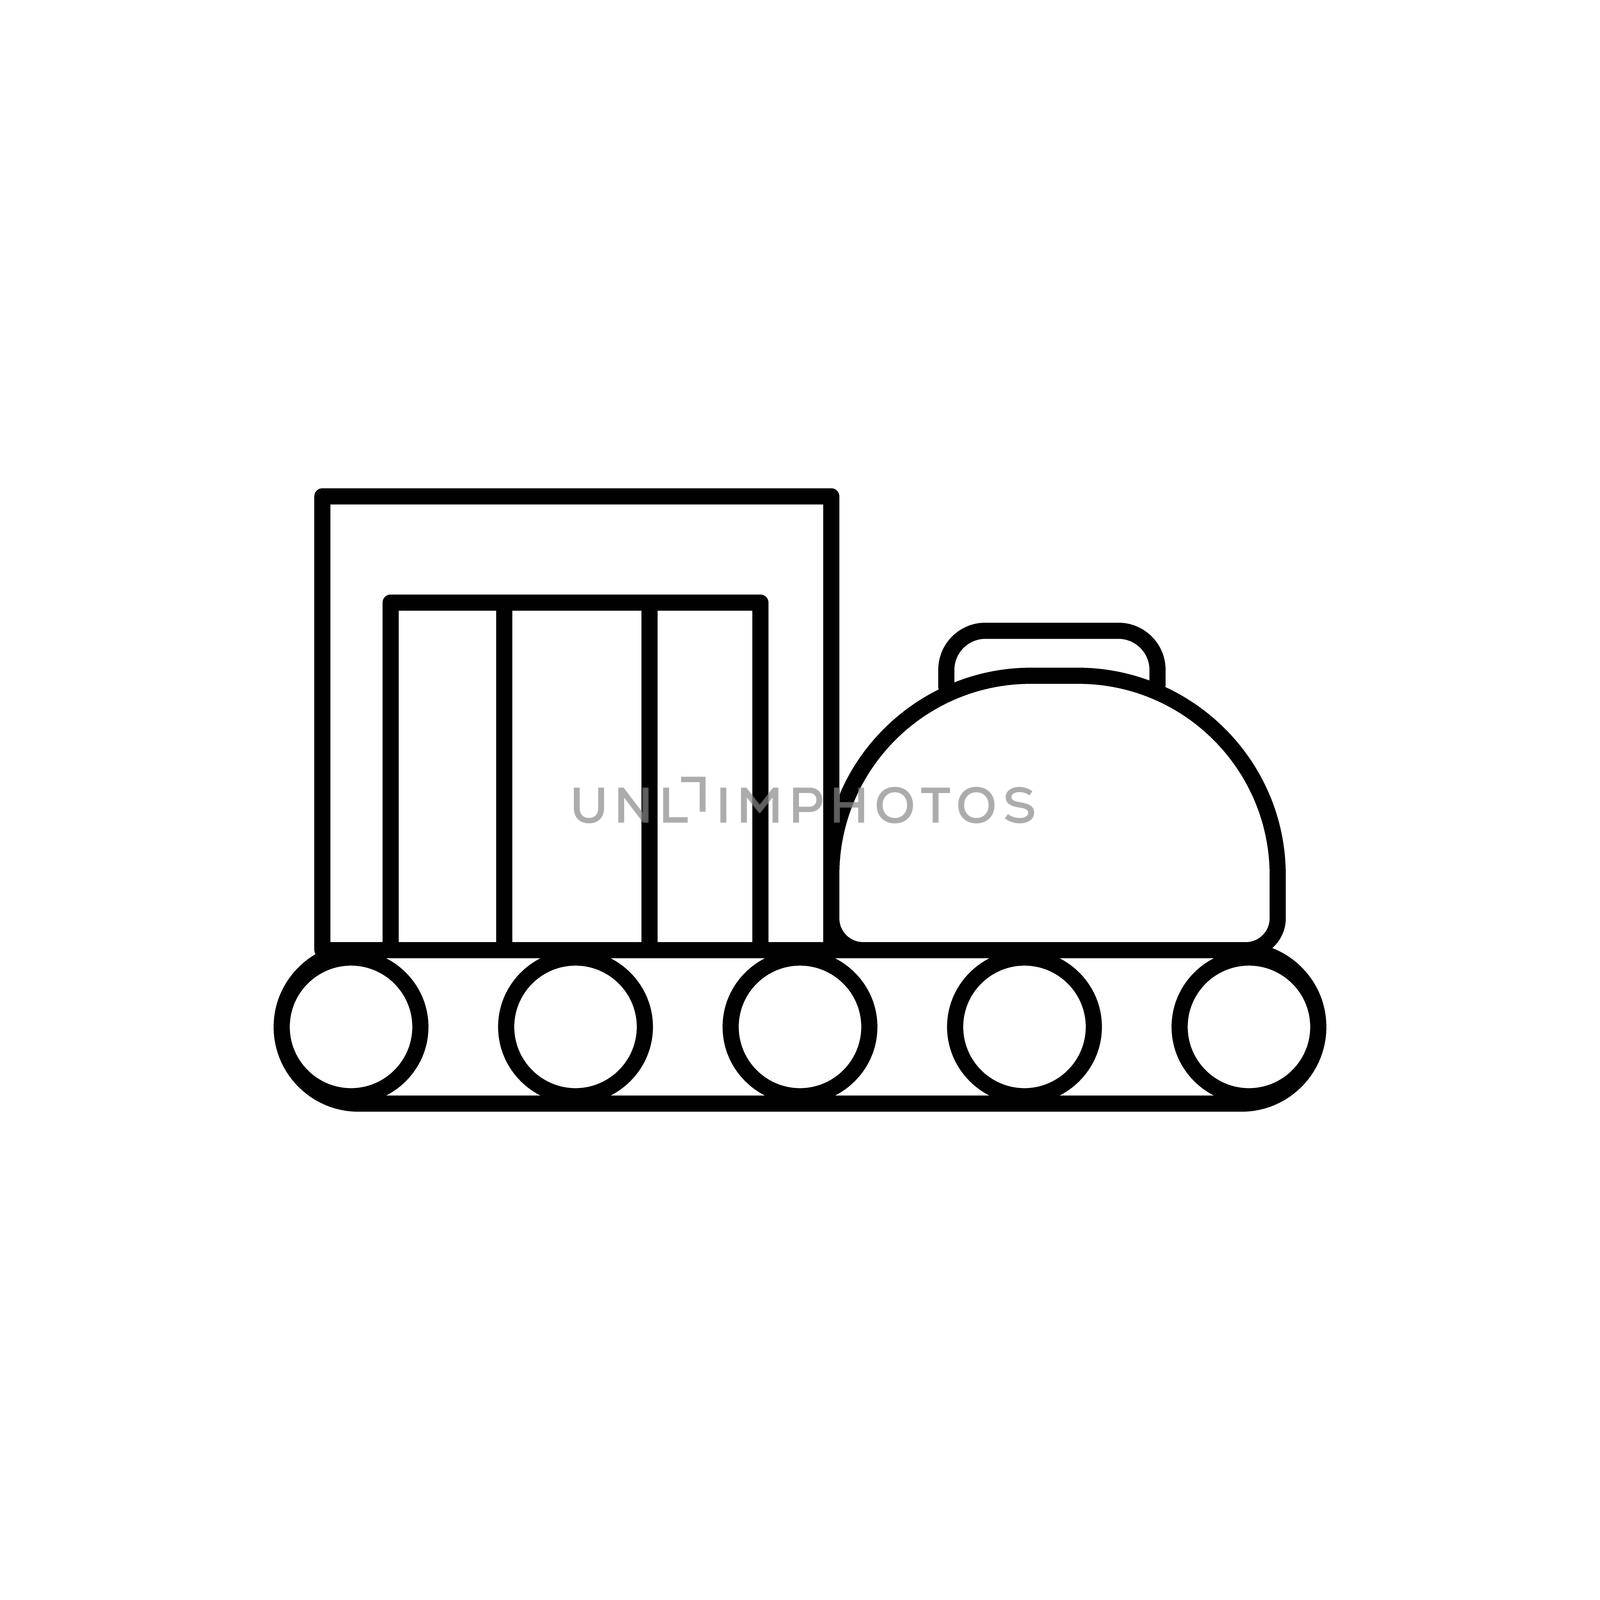 conveyor, travel, luggage line icon. elements of airport, travel illustration icons. signs, symbols can be used for web, logo, mobile app, UI, UX by fidaneagle